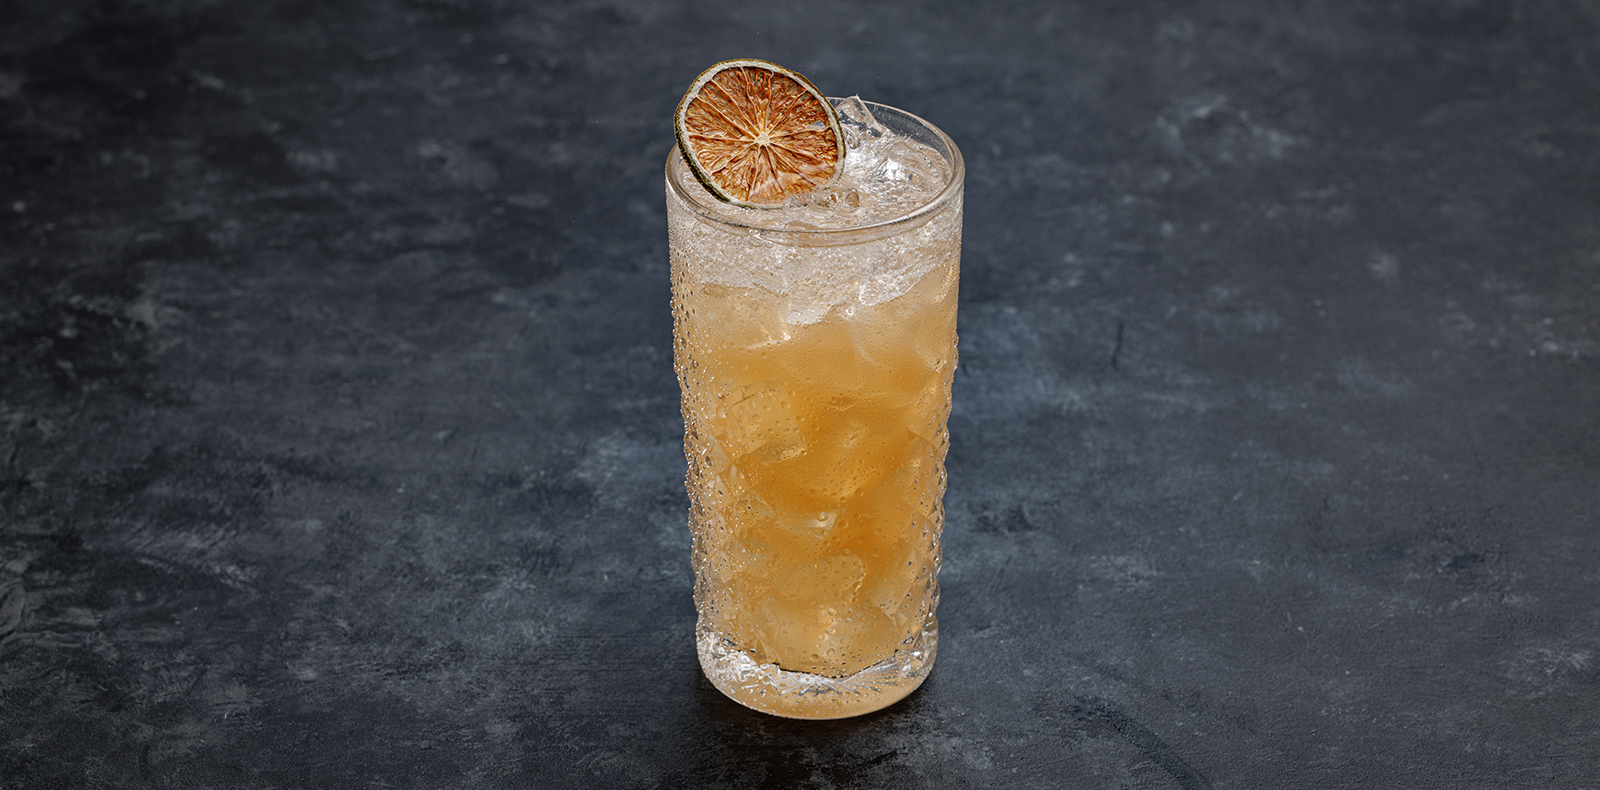 Patrón Silver Tequila, grapefruit juice, our agave sweet + sour, soda water and house salt rim